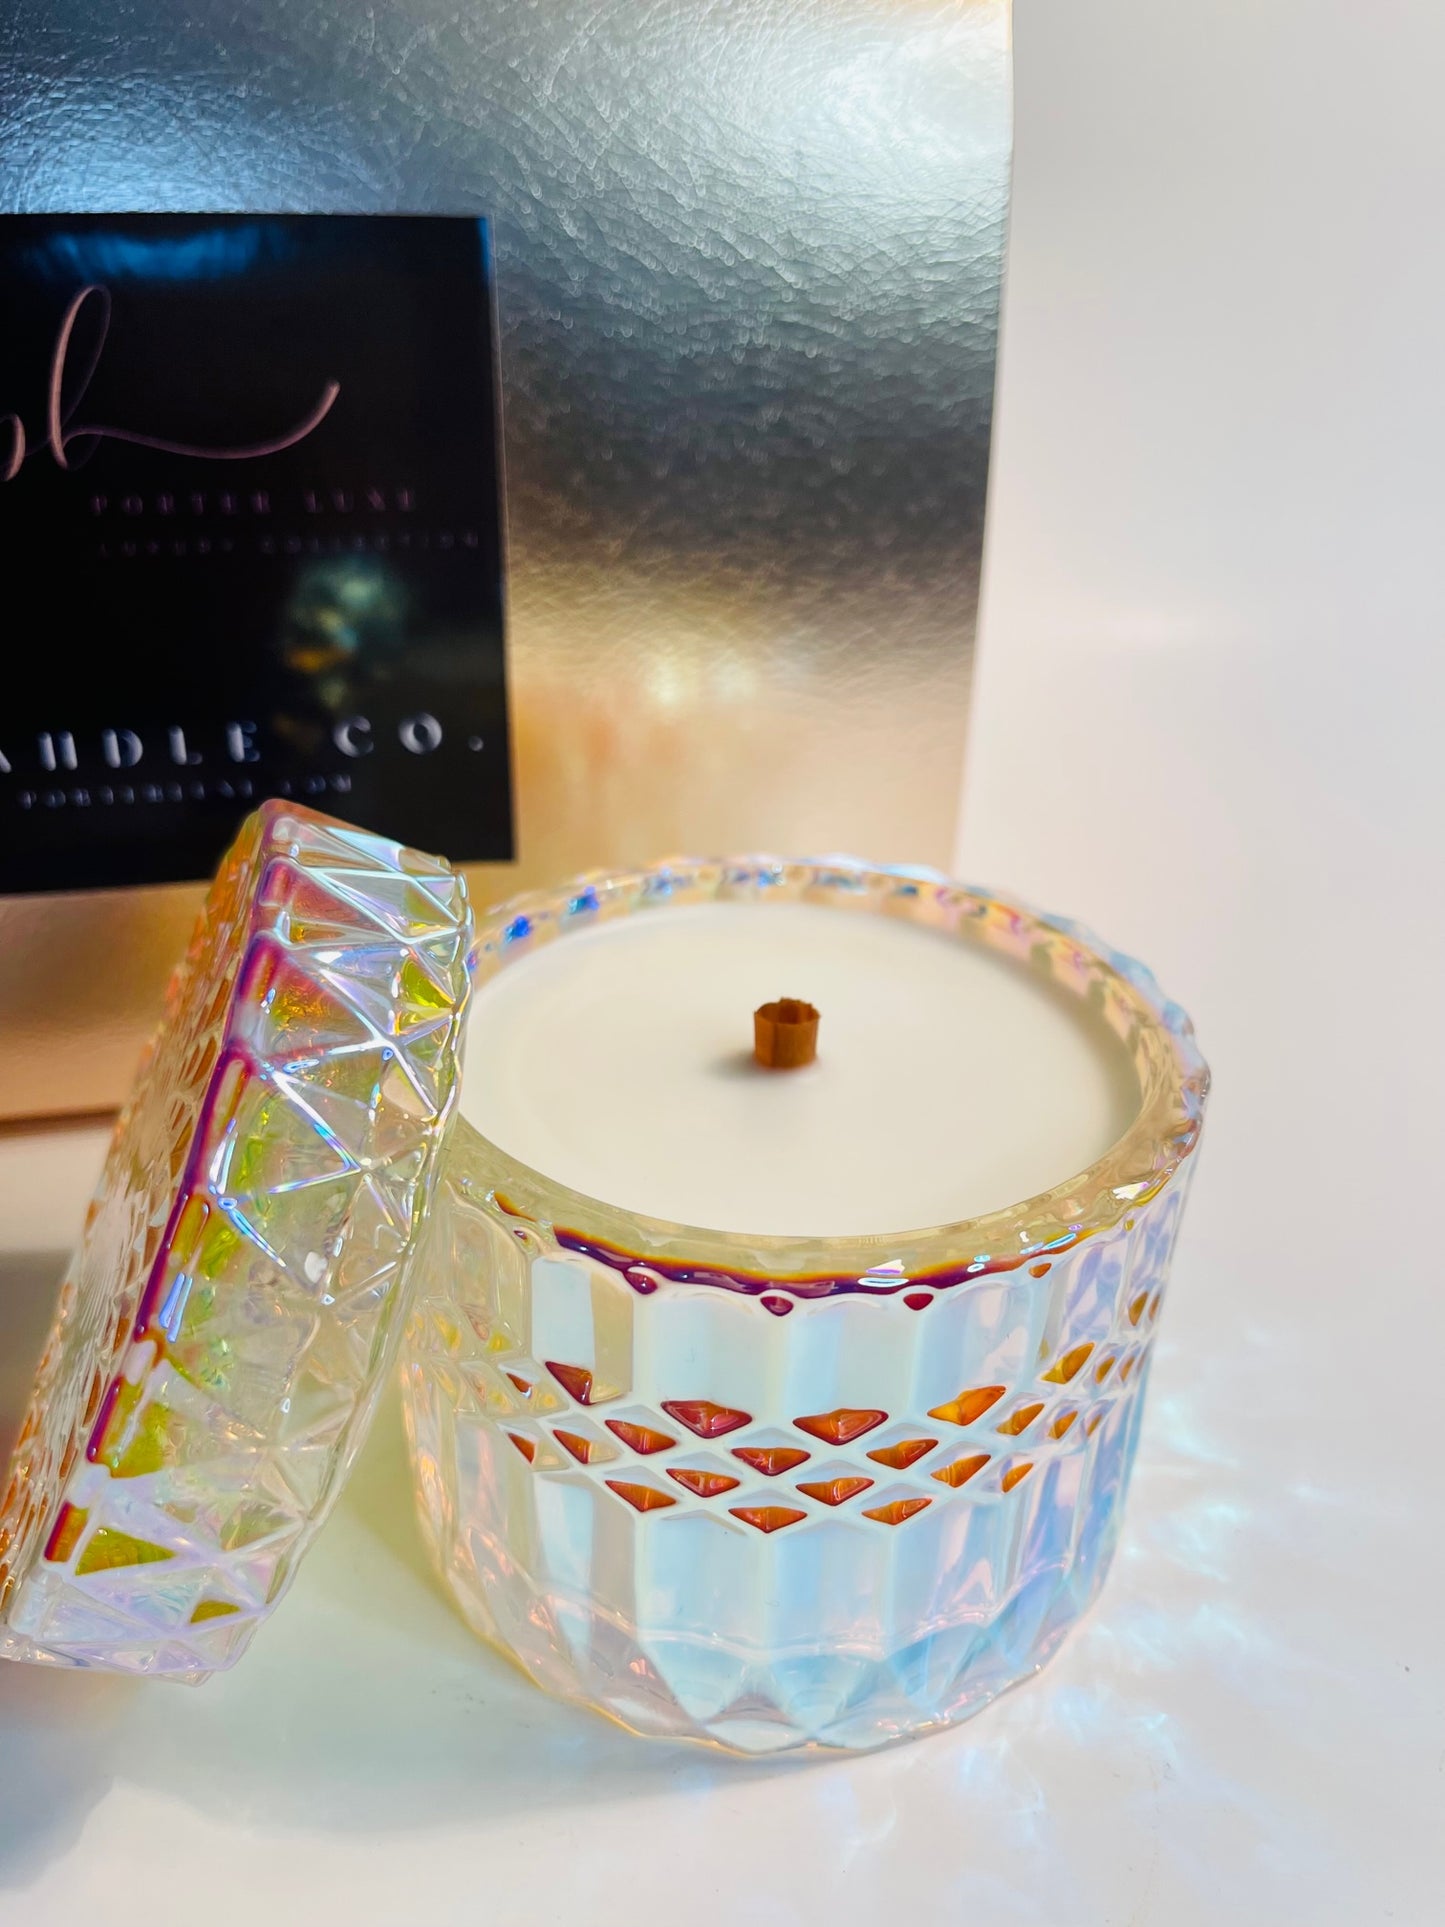 Porter Luxe -  Champagne Bubbles Candle (Deliciously Surprising)